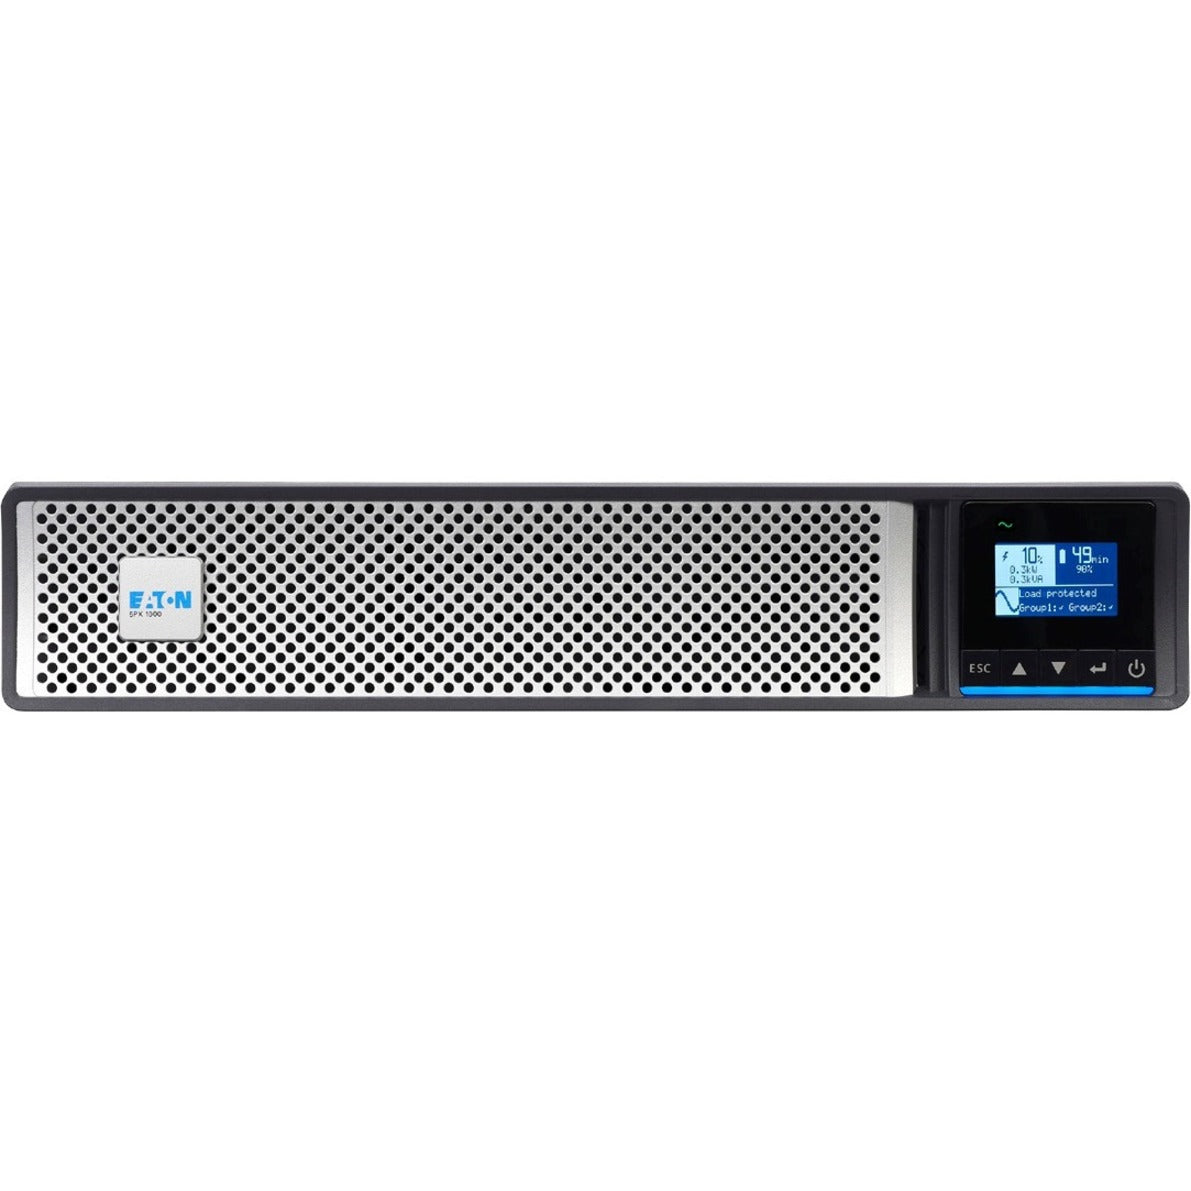 Eaton 5PX3000RTG2 5PX G2 UPS, 3000 VA/3000 W, Pure Sine Wave, 3 Year Warranty, Network-M2 Card, Energy Star, USB Cable, RS-232 Cable, Rack-Mounting Hardware, Tower Support Stands, Safety Guide, Quick Start Guide